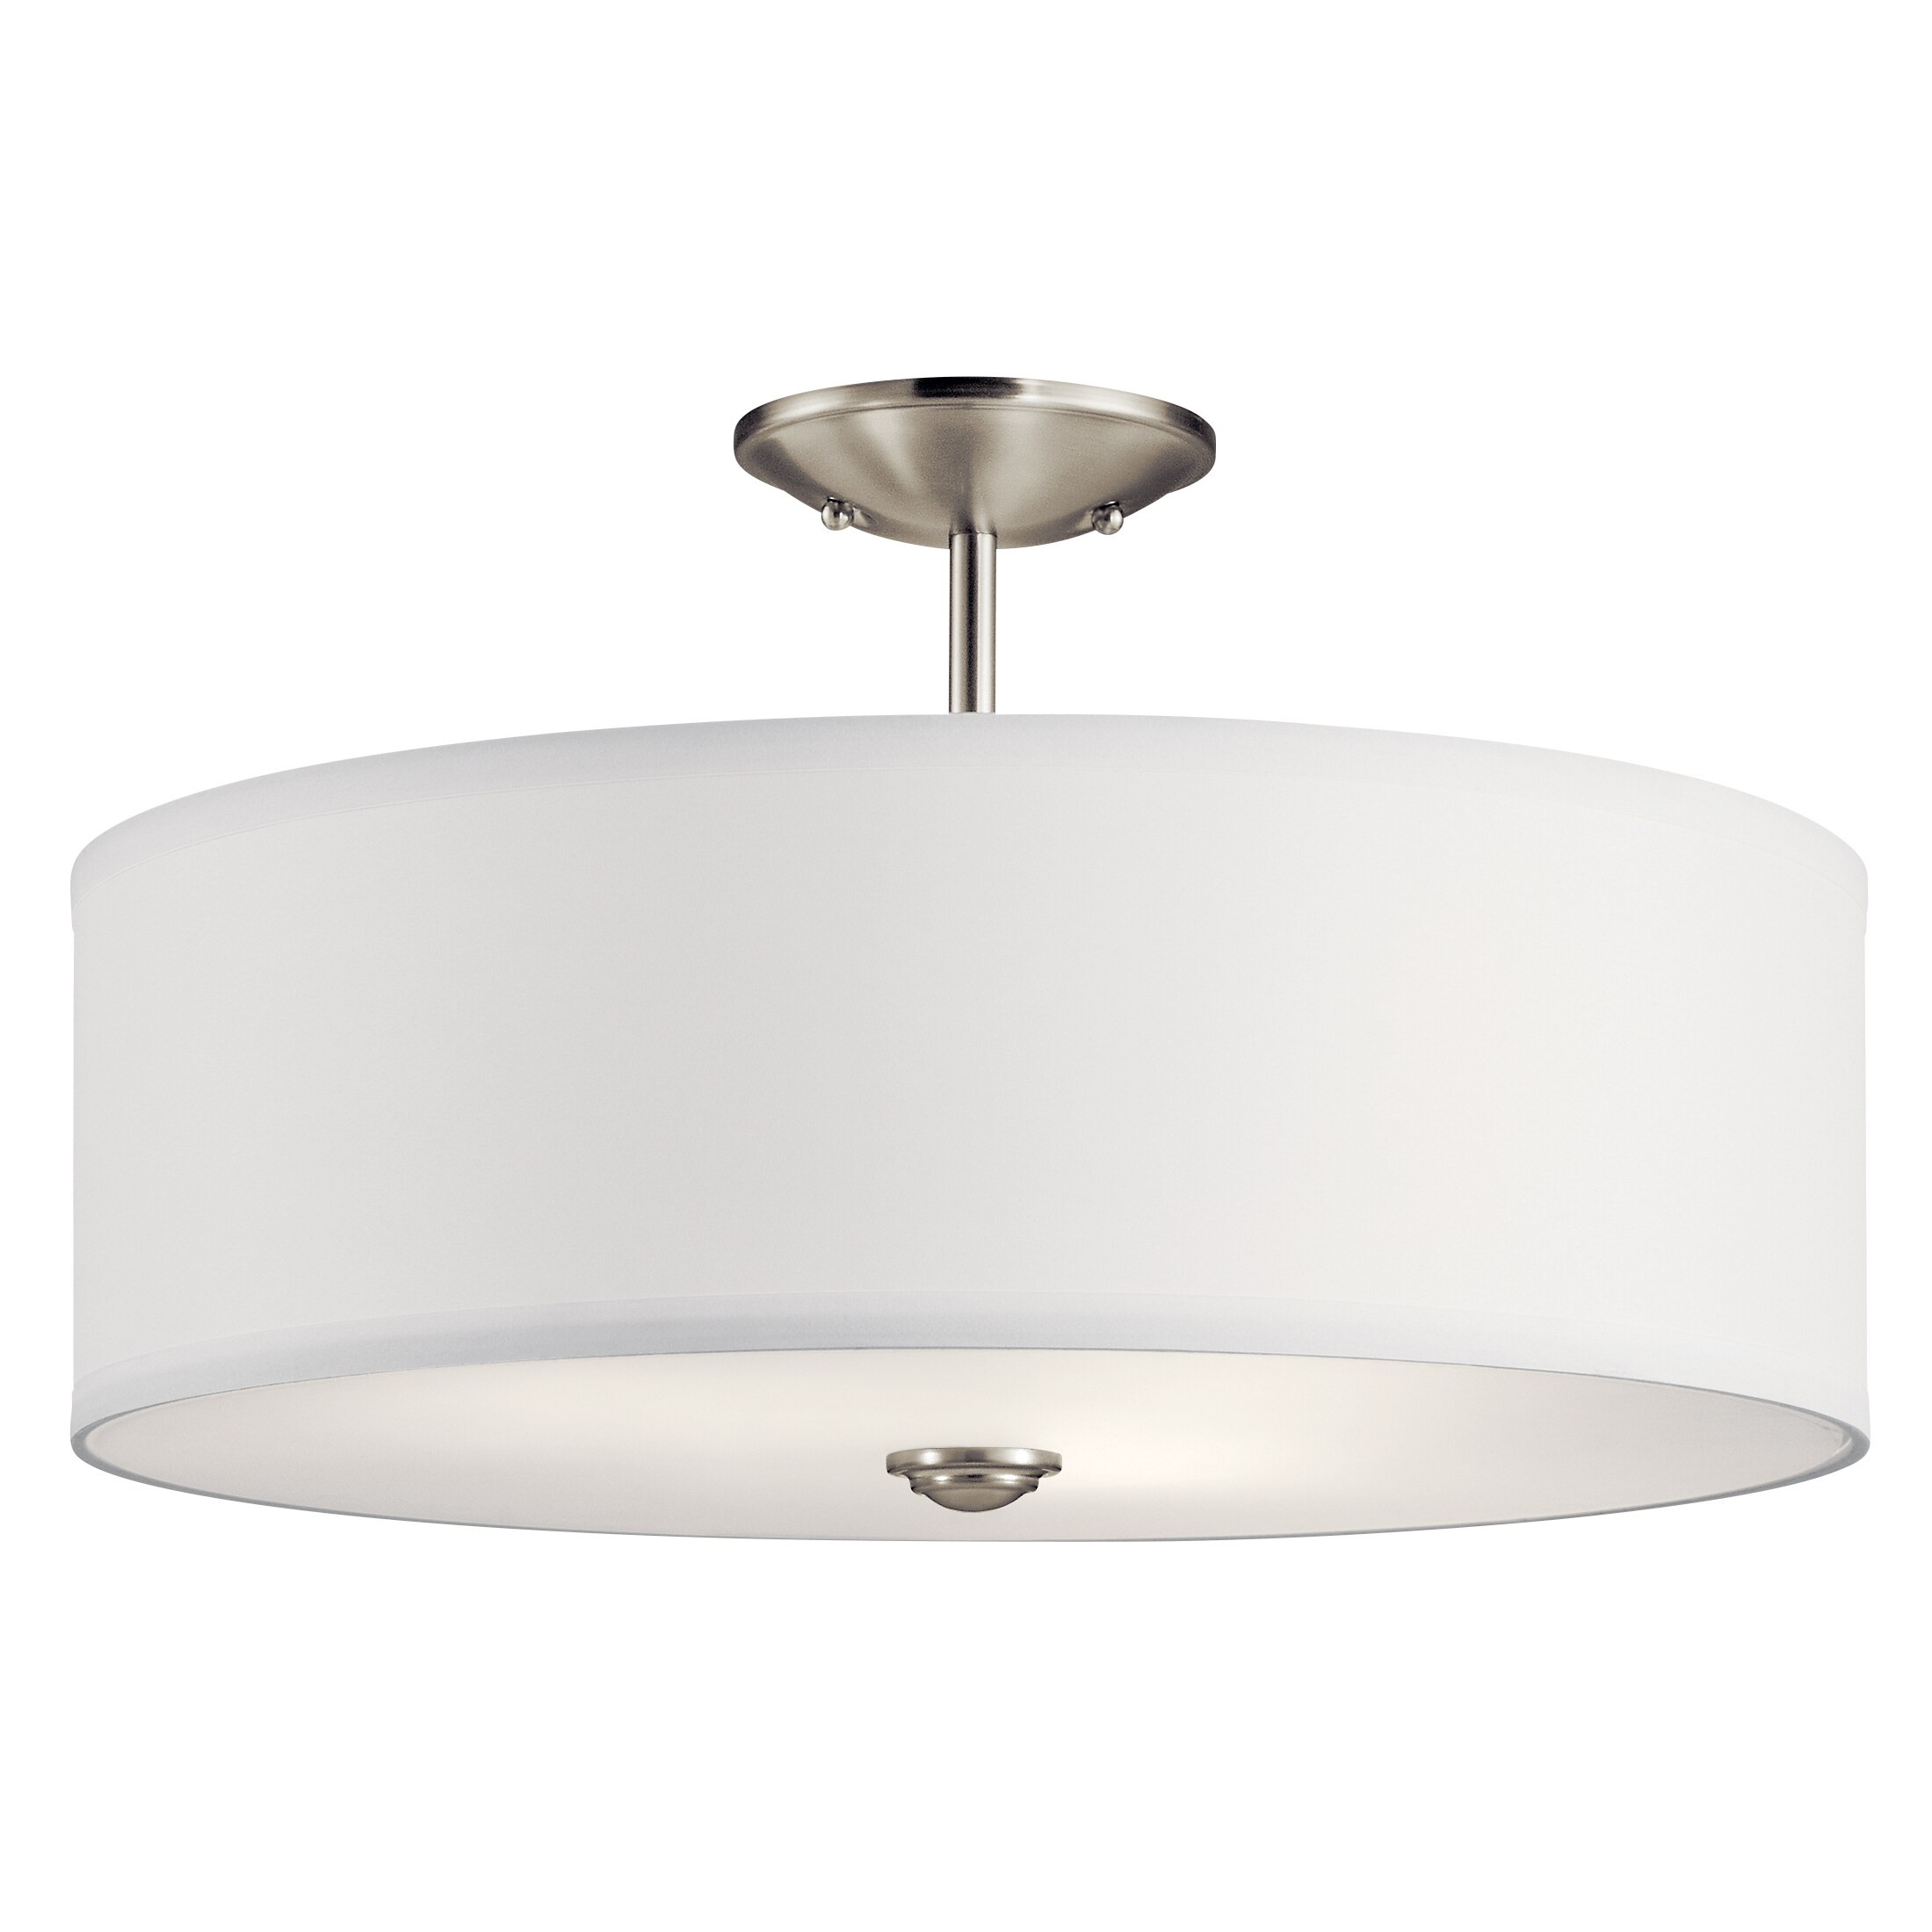 Brushed Nickel With Ebony Wood And Satin White Glass Flush Ceiling Fixture 